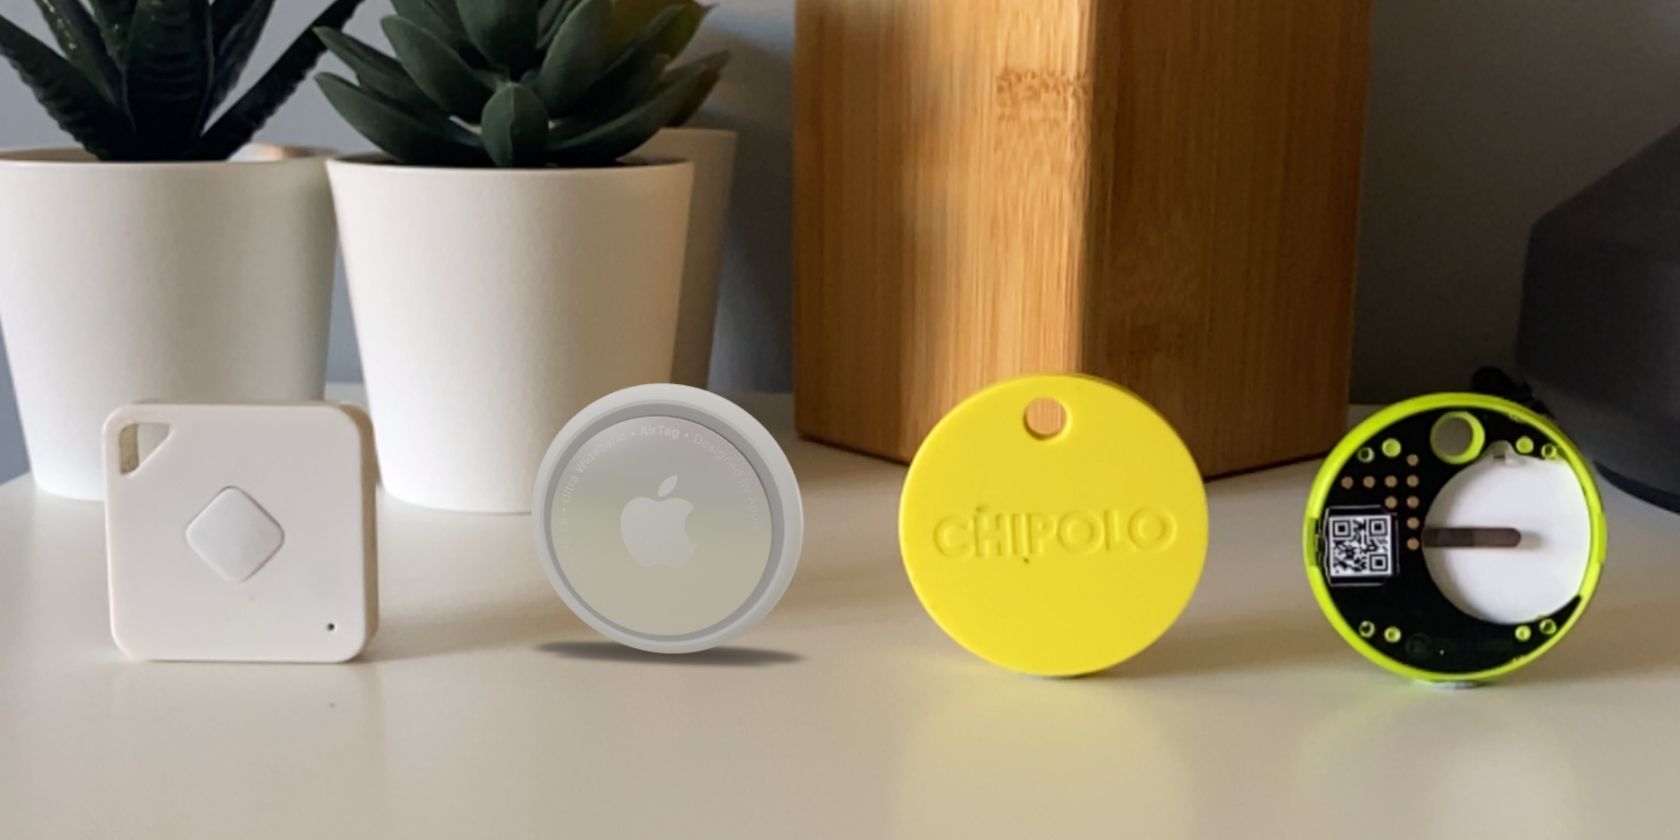 Apple AirTags vs. Chipolo vs. Tile: Which Is the Best Bluetooth Tracker?